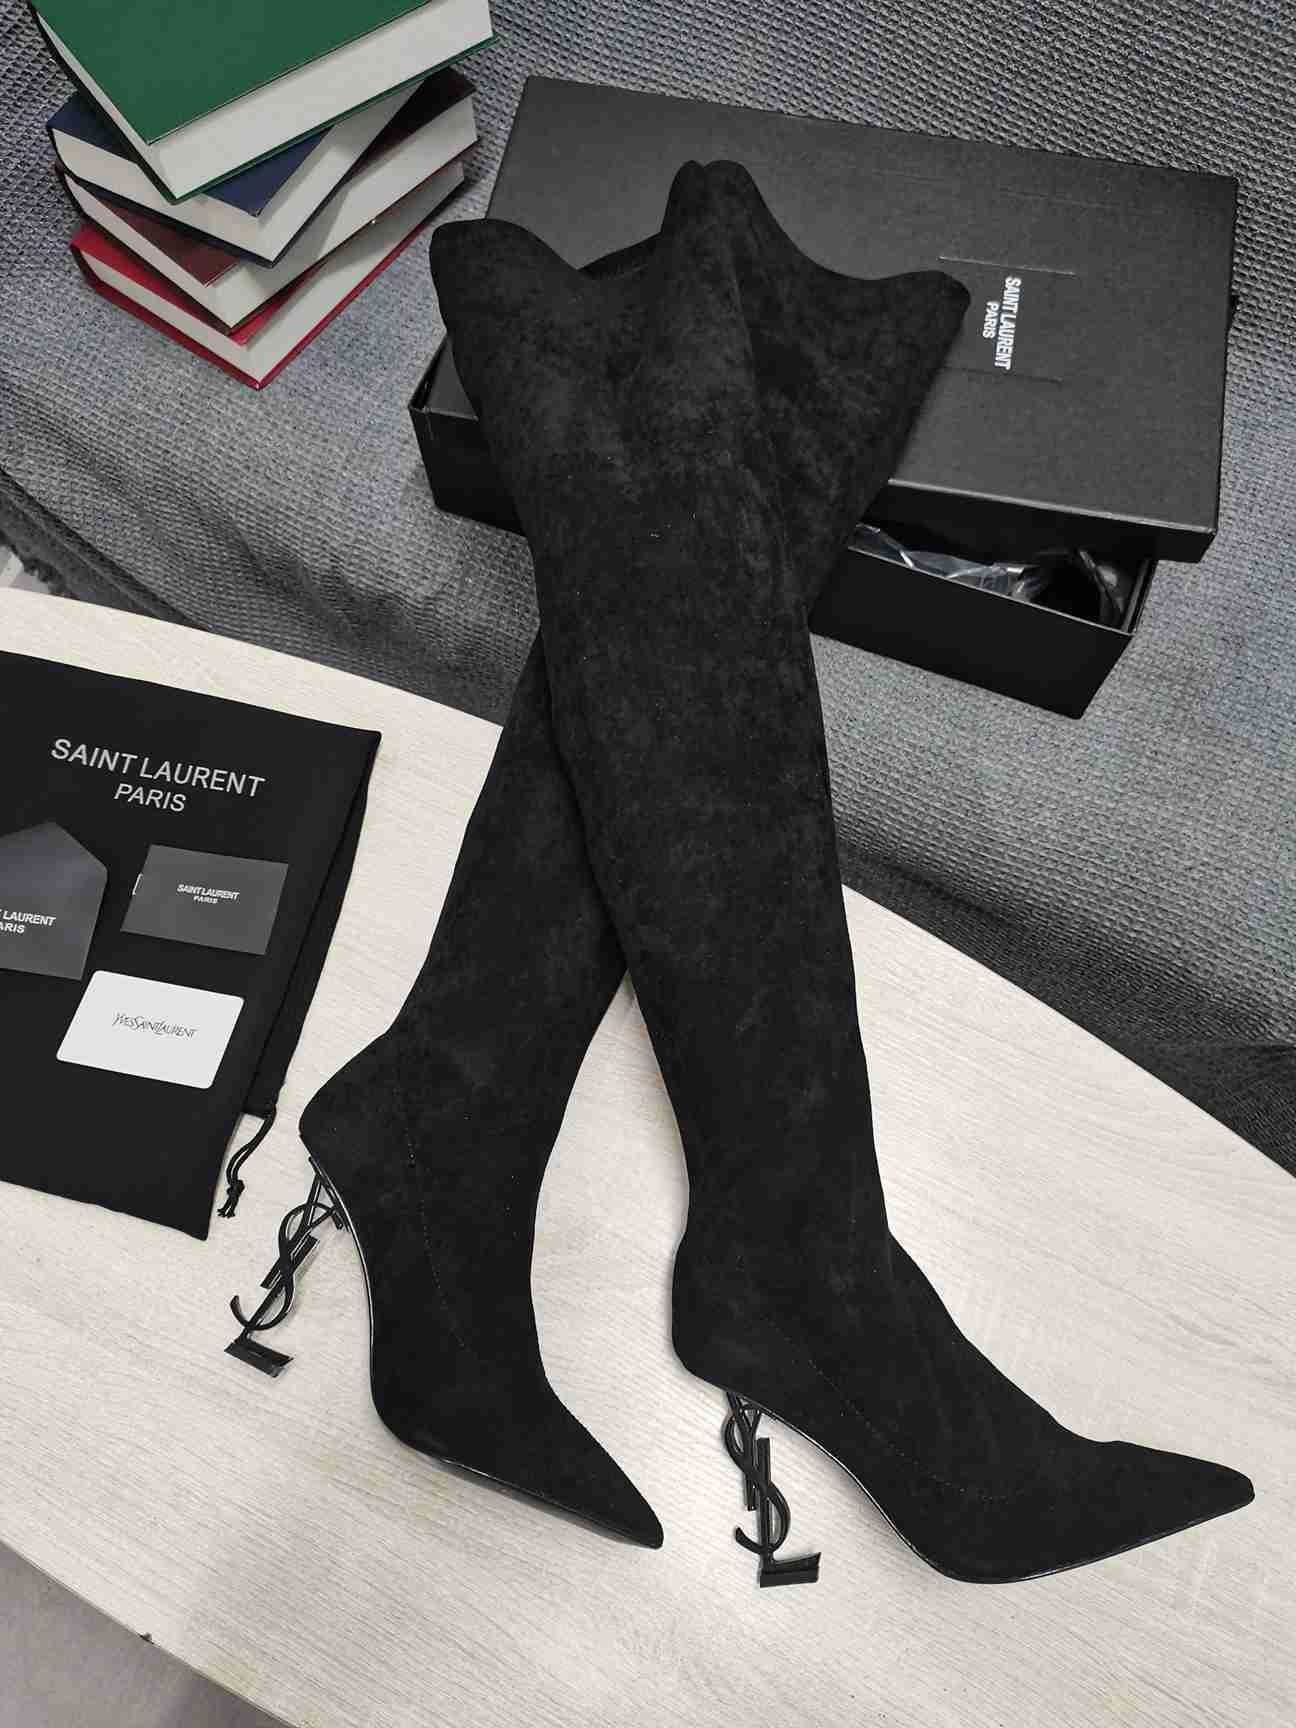     ANKLE BOOT high heel over knee heeled     boots thigh high boots